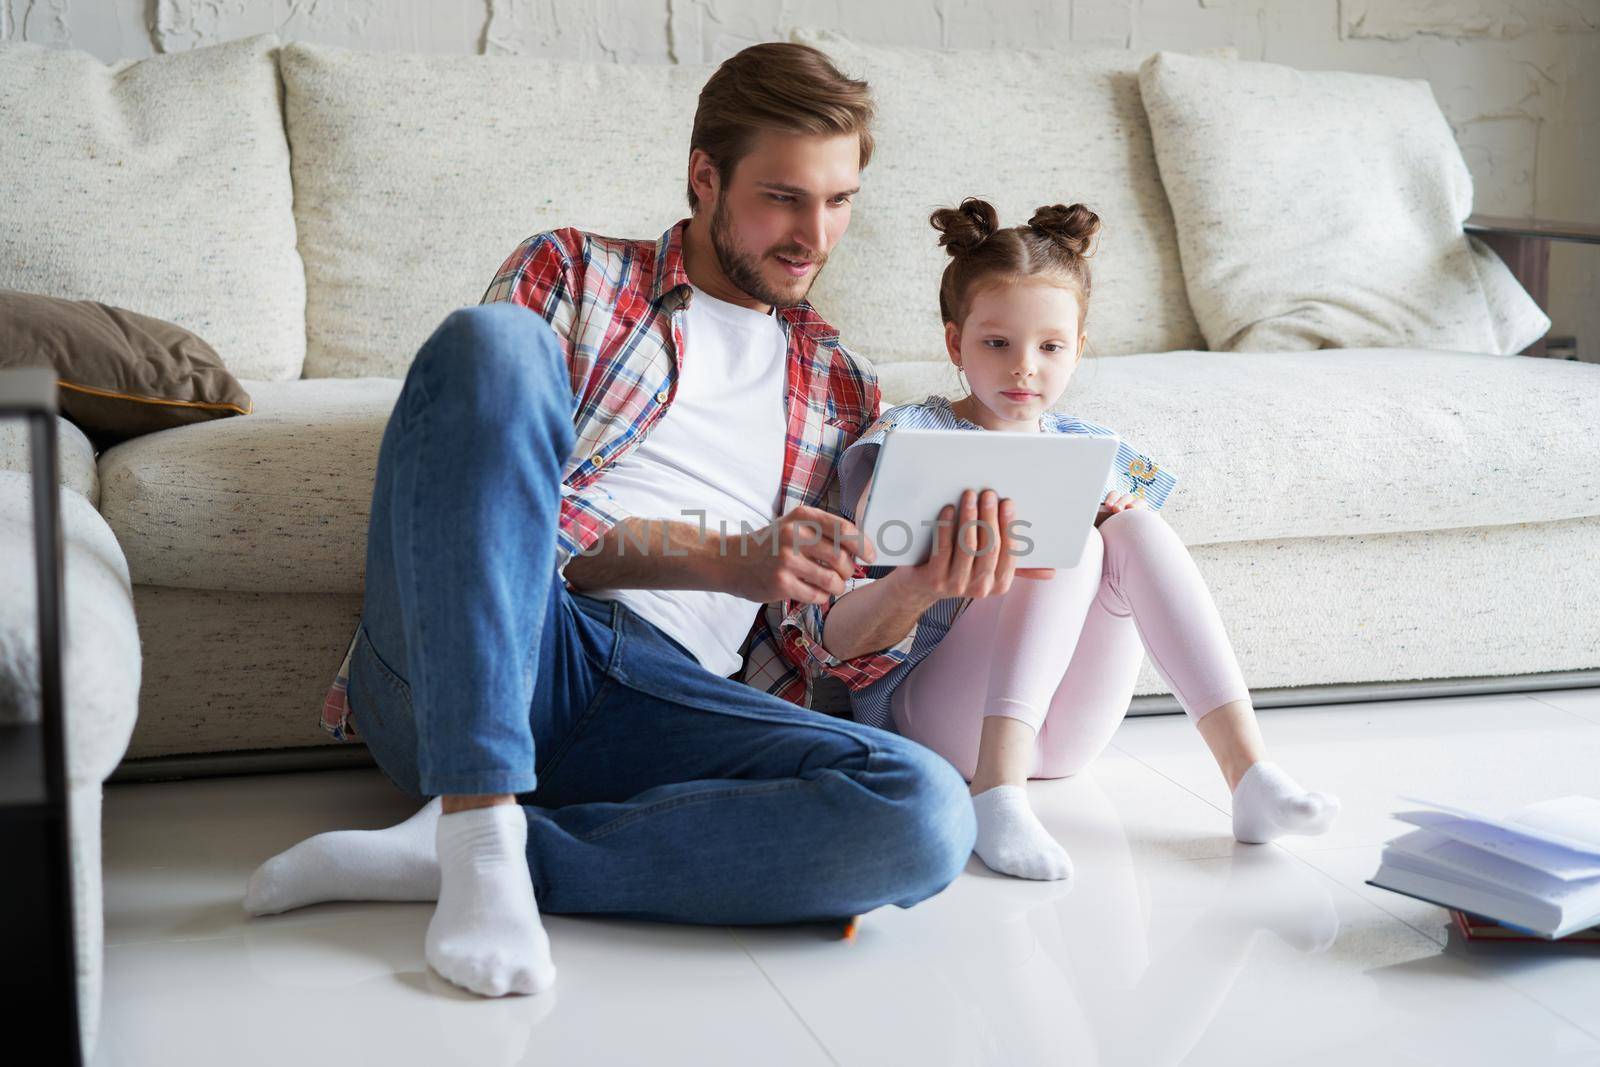 Smiling father and daughter sitting on floor in living room with digital tablet, teaching lessons